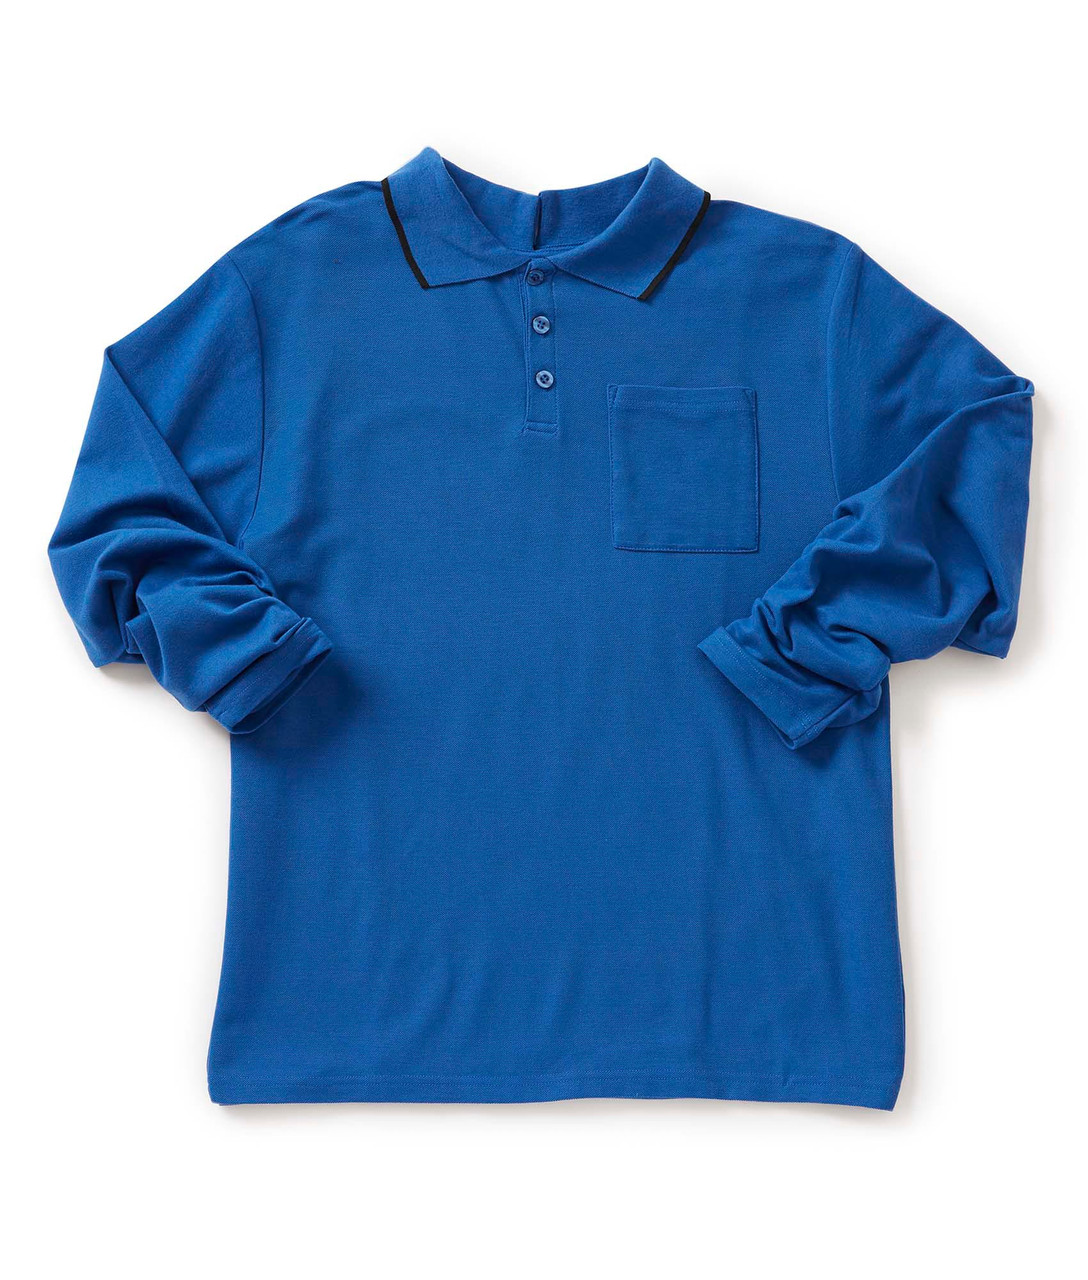 Silverts SV51240 Men's Antimicrobial Open Back Polo Shirt Classic Blue, Size=M, SV51240-SV1206-M